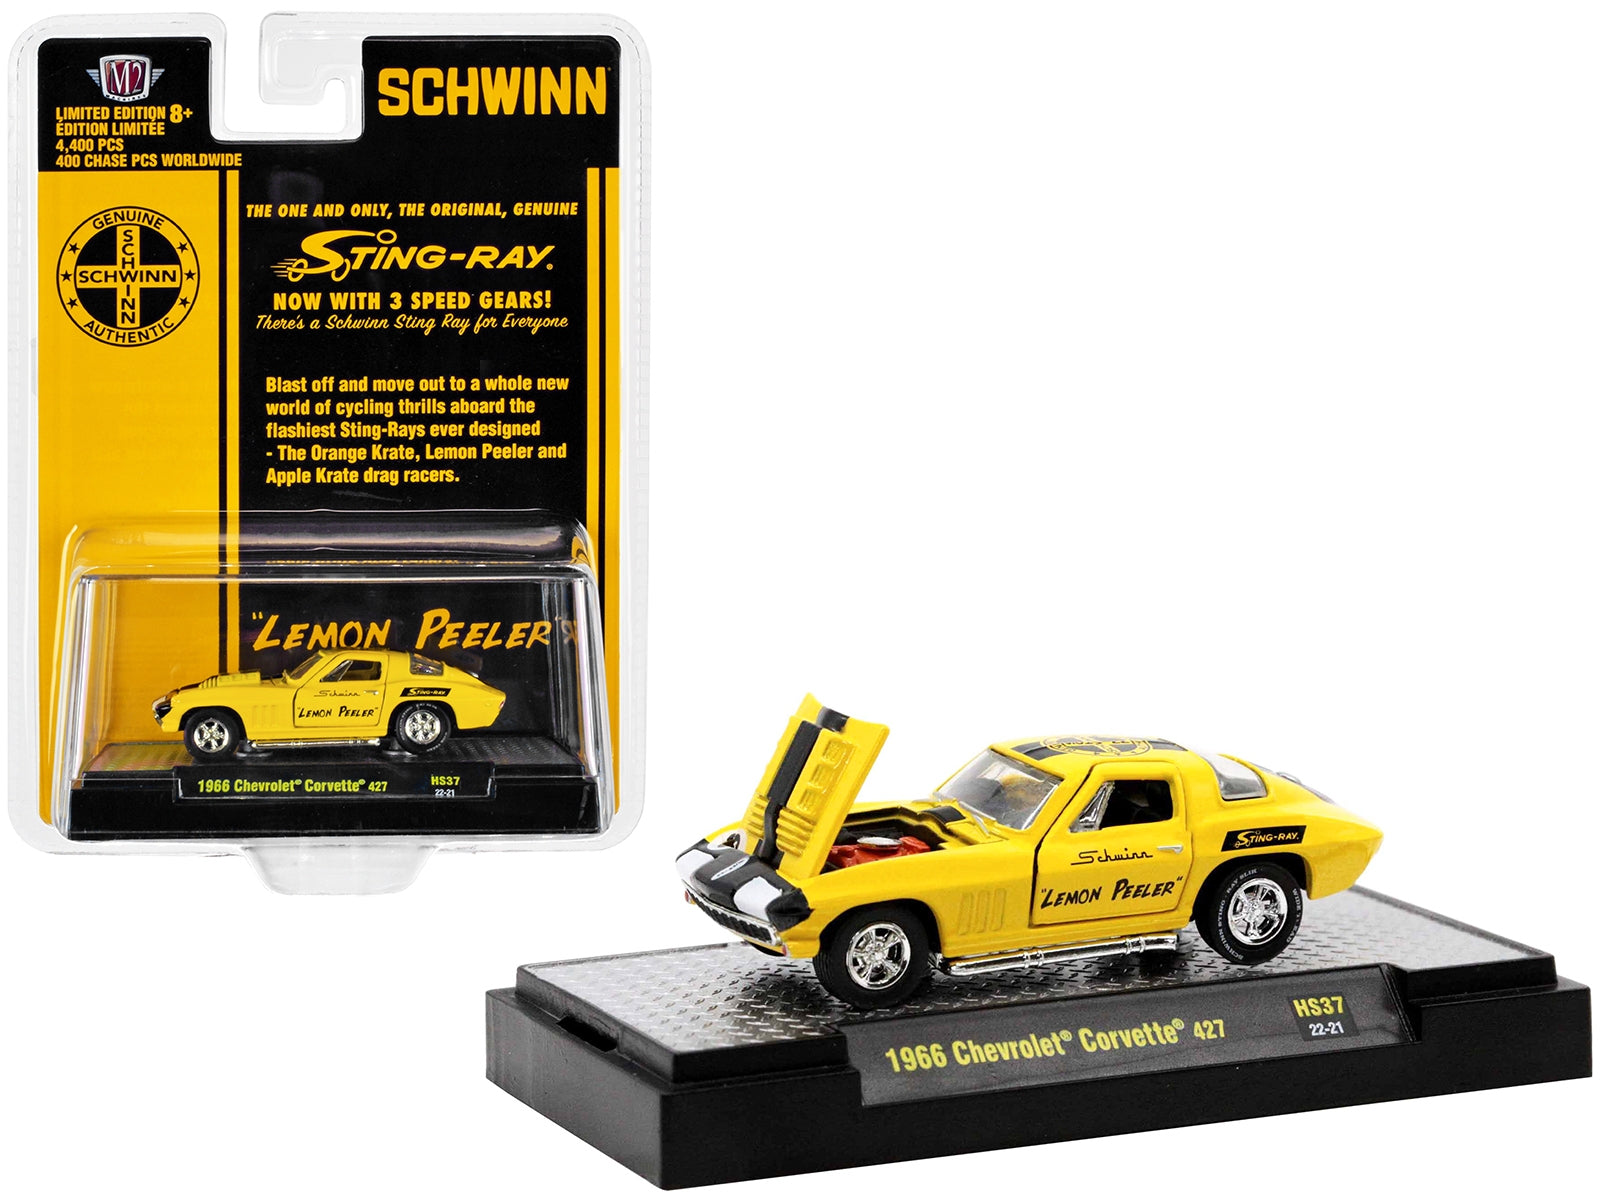 1966 Chevrolet Corvette 427 #68 Yellow with Black Stripes and Graphics "Schwinn Lemon Peeler" Limited Edition to 4400 pieces Worldwide 1/64 Diecast Model Car by M2 Machines M2